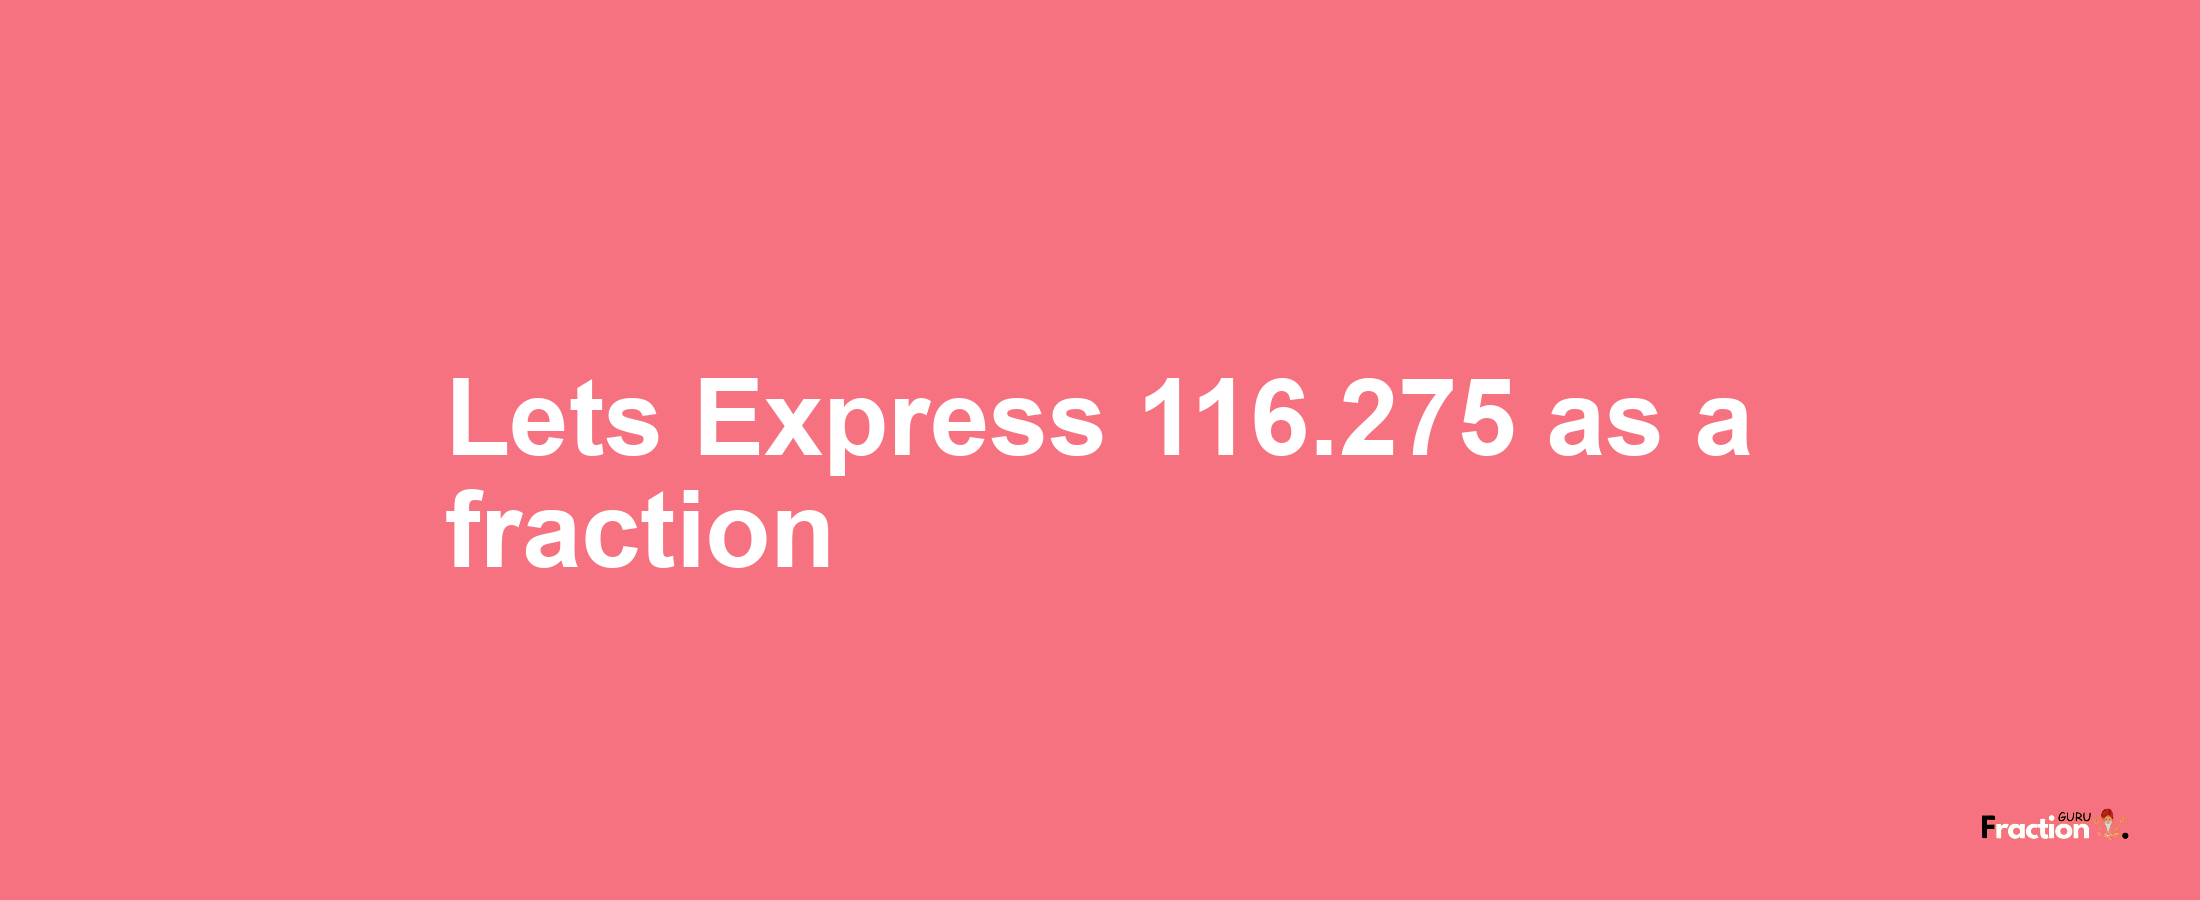 Lets Express 116.275 as afraction